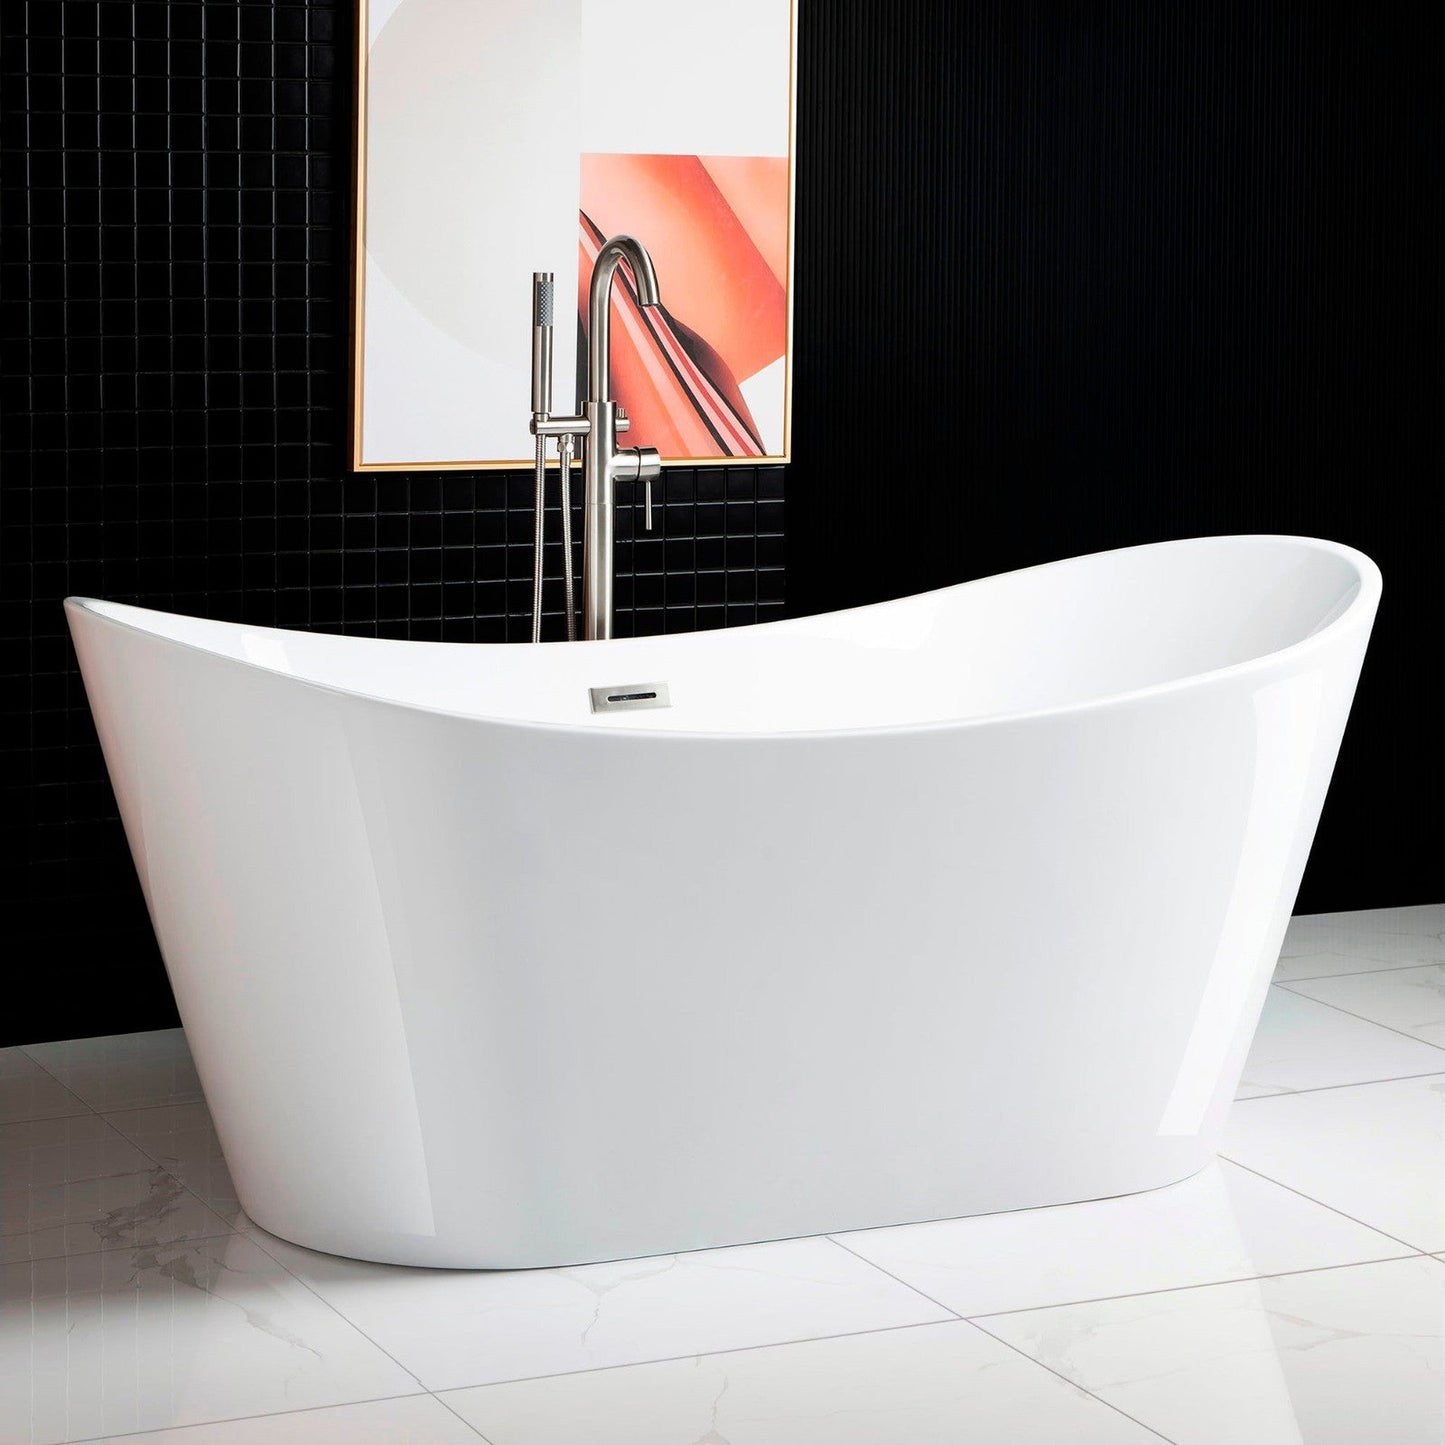 WoodBridge B0010 67" White Acrylic Freestanding Contemporary Soaking Bathtub With Chrome Drain, Overflow, F0024CHVT Tub Filler and Caddy Tray